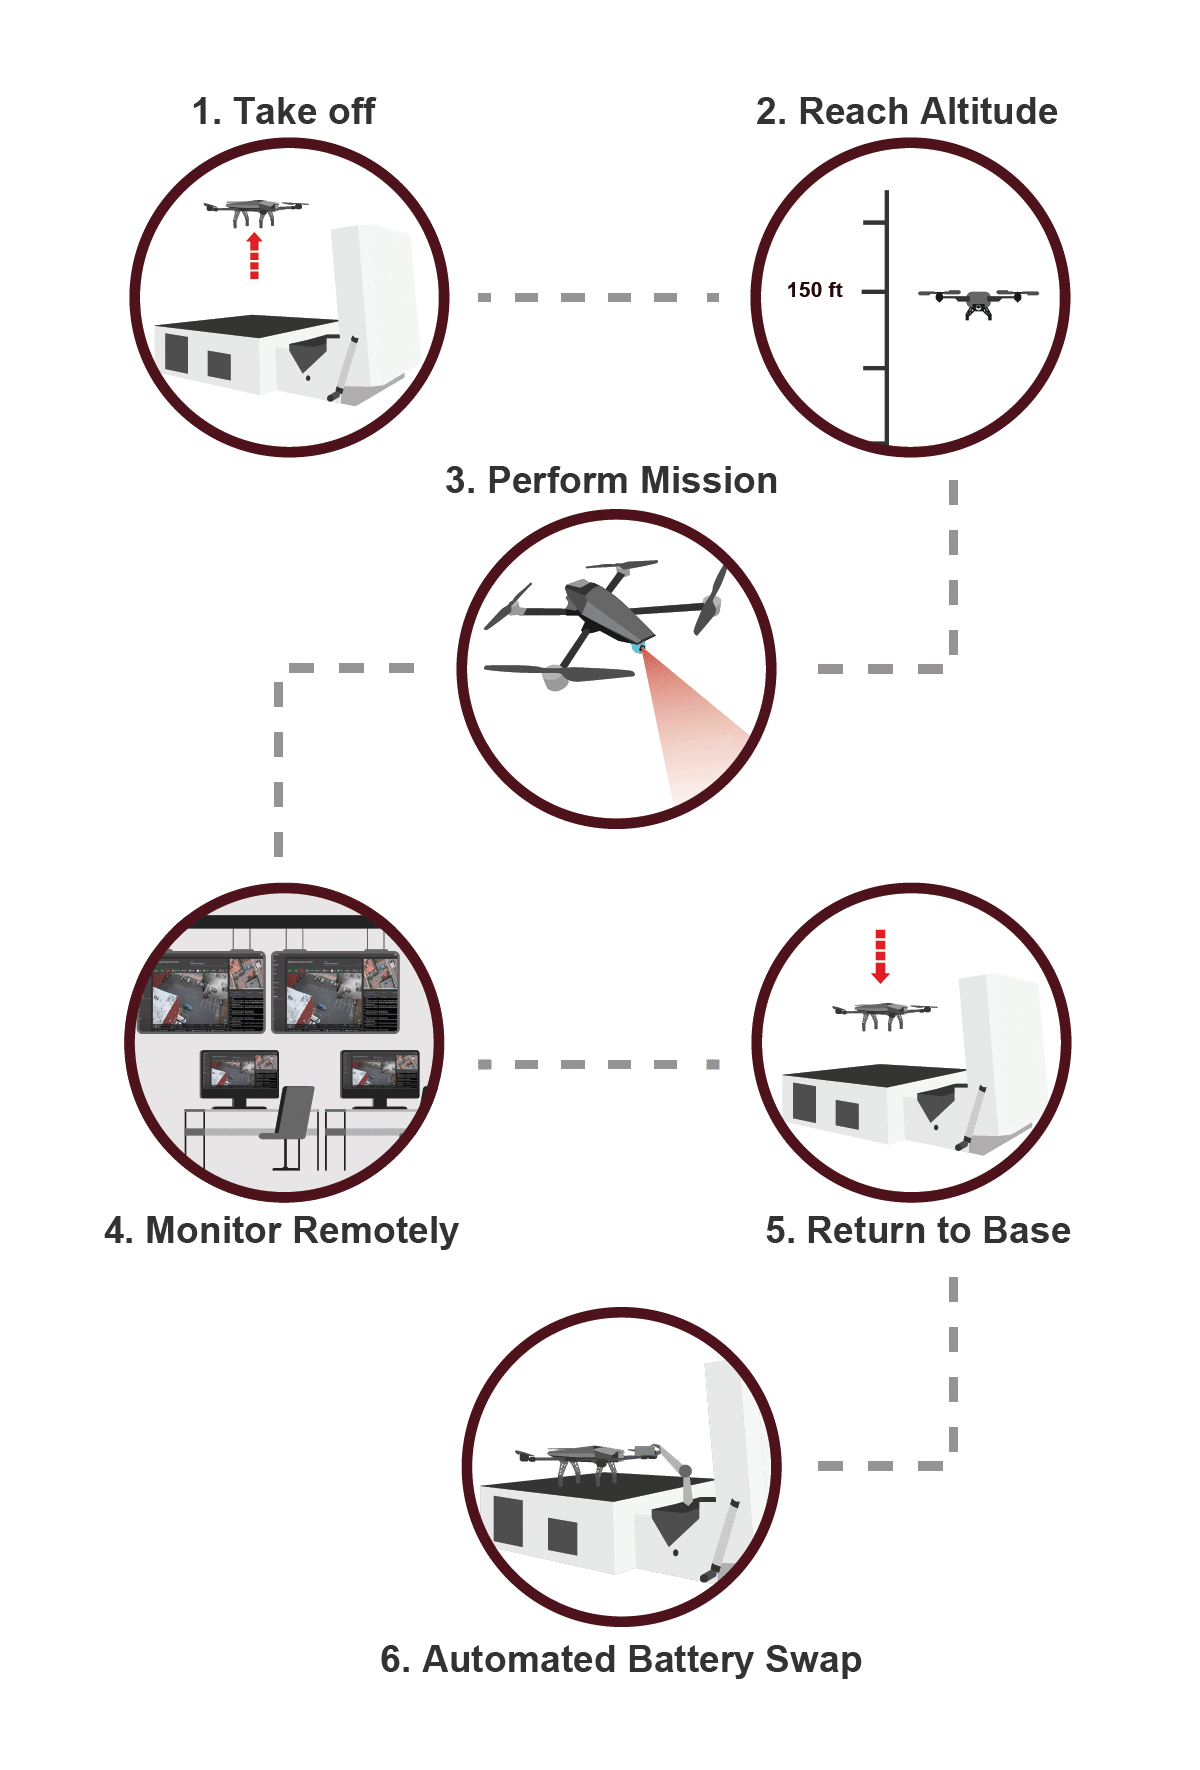 Visual representation on how a Security Drone operations from start to finish.